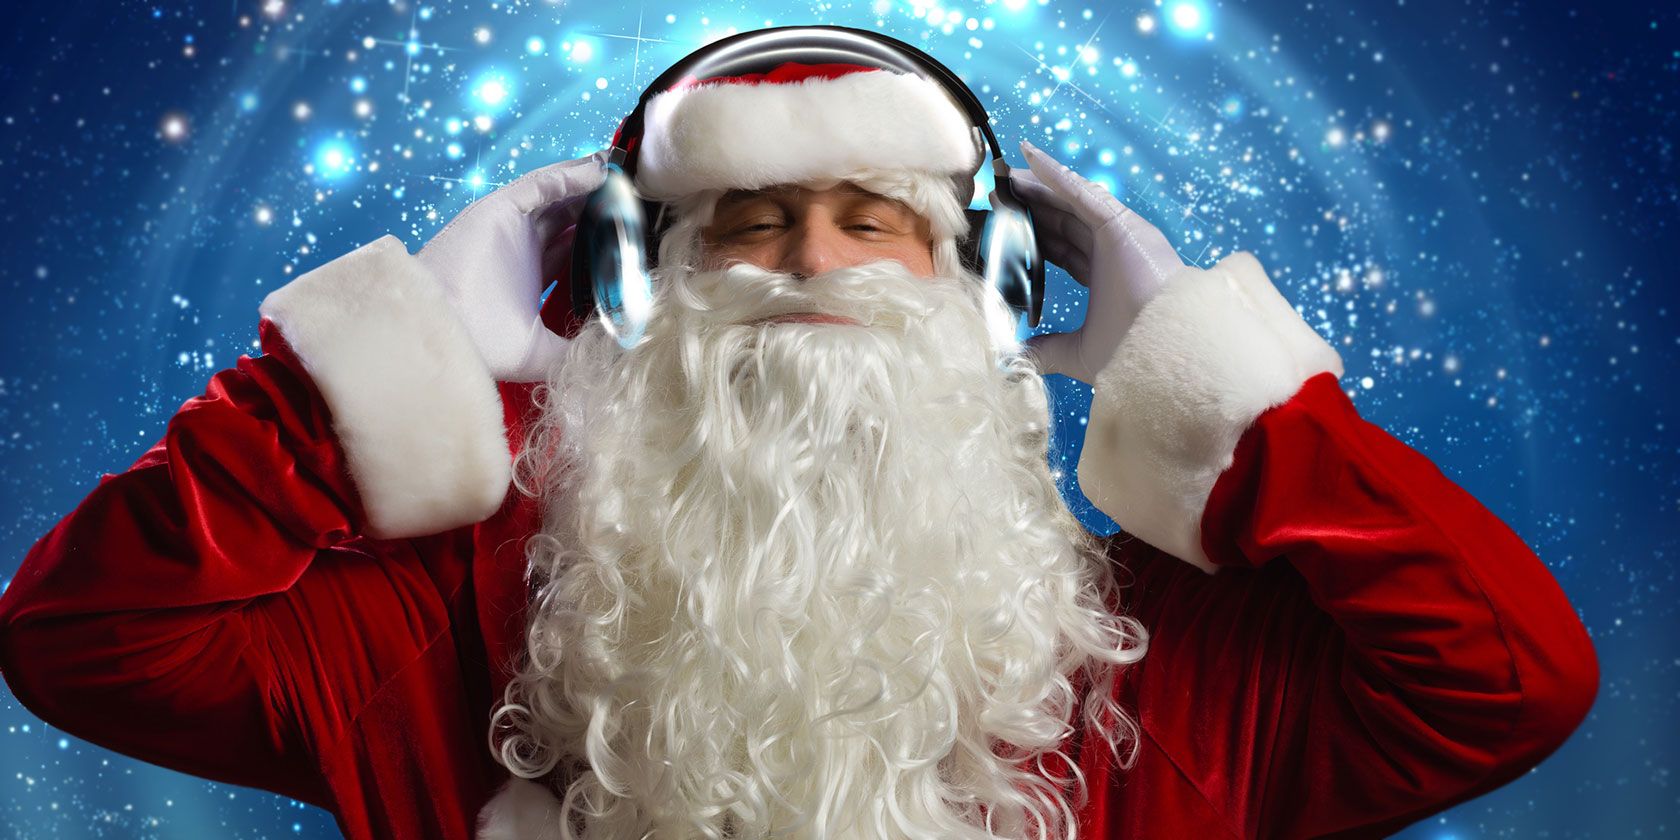 christmas songs to download free